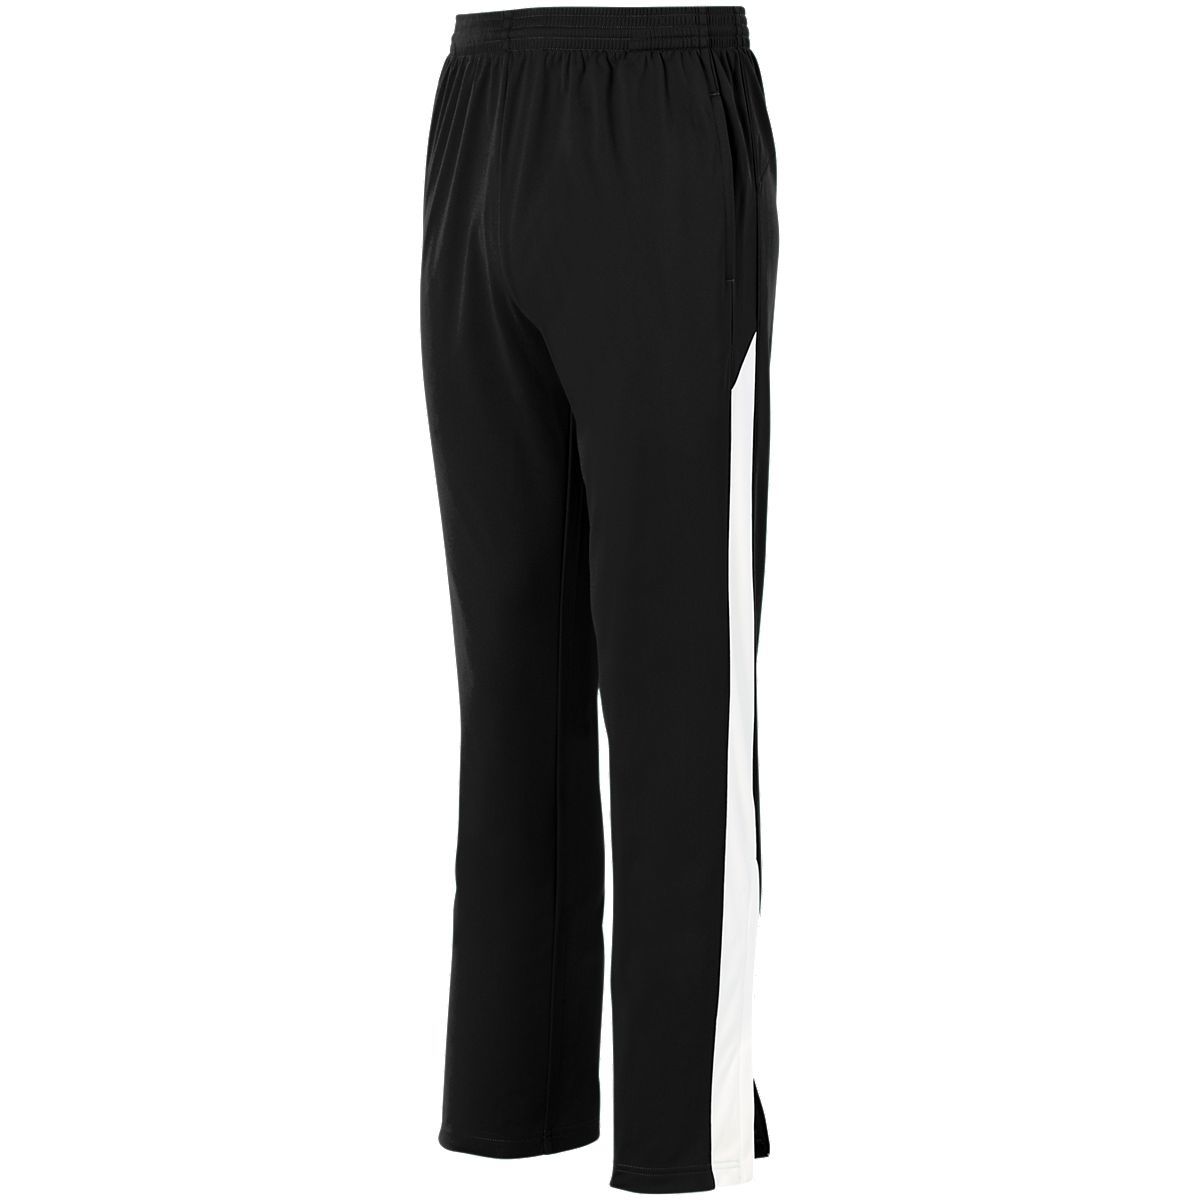 Augusta Sportswear Medalist Pant 2.0 in Black/White  -Part of the Adult, Adult-Pants, Pants, Augusta-Products product lines at KanaleyCreations.com